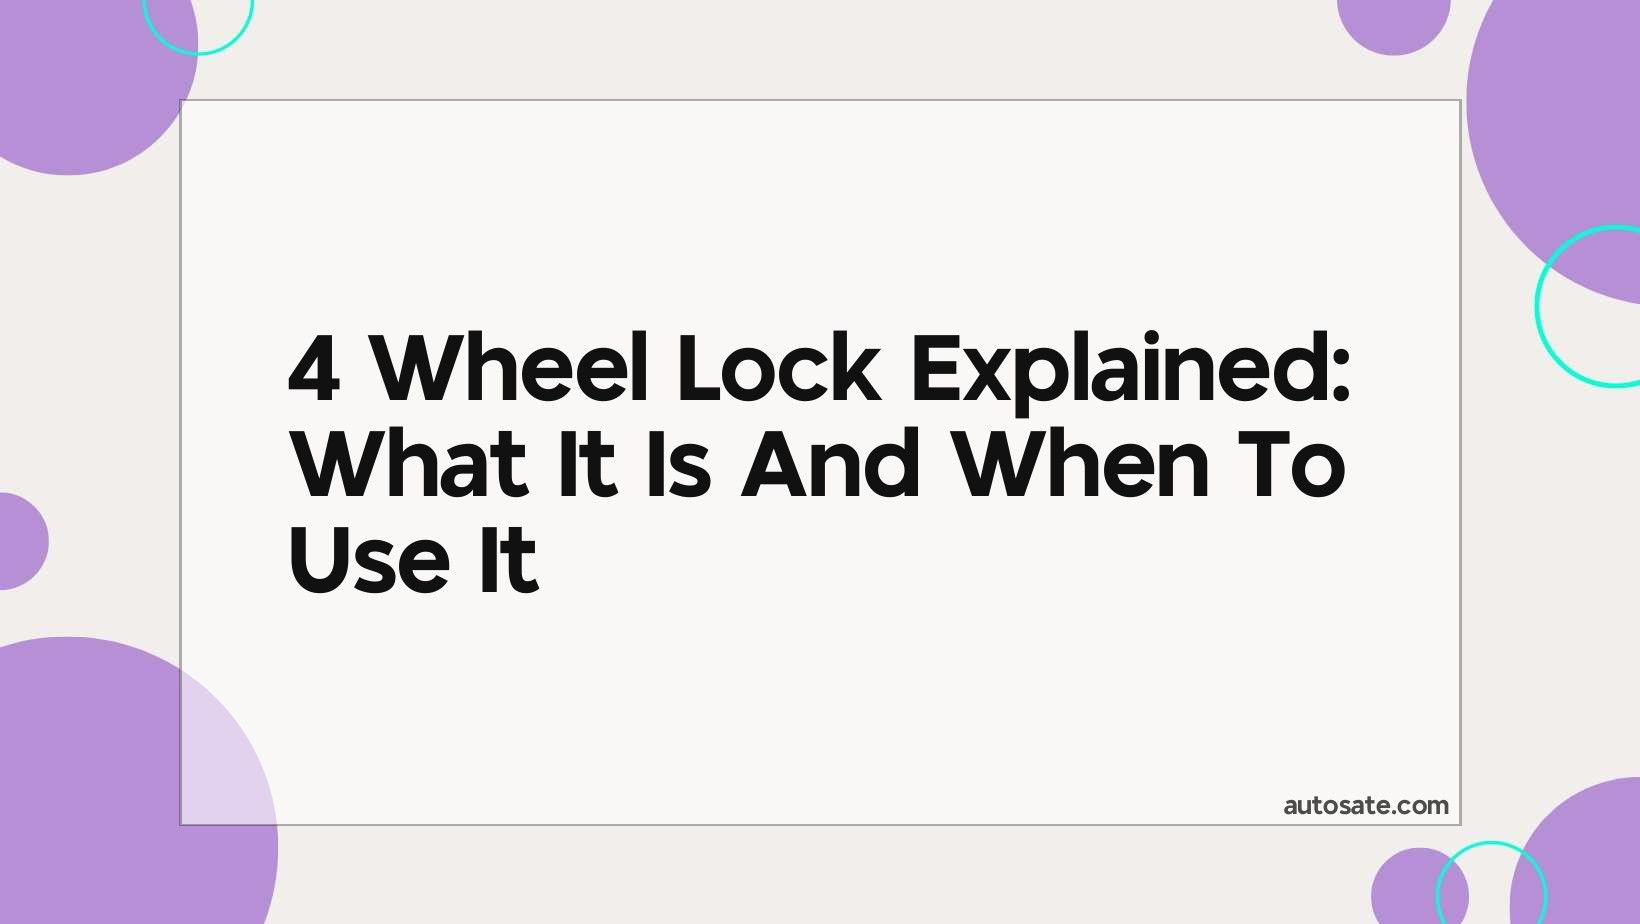 4 Wheel Lock Explained: What It Is And When To Use It